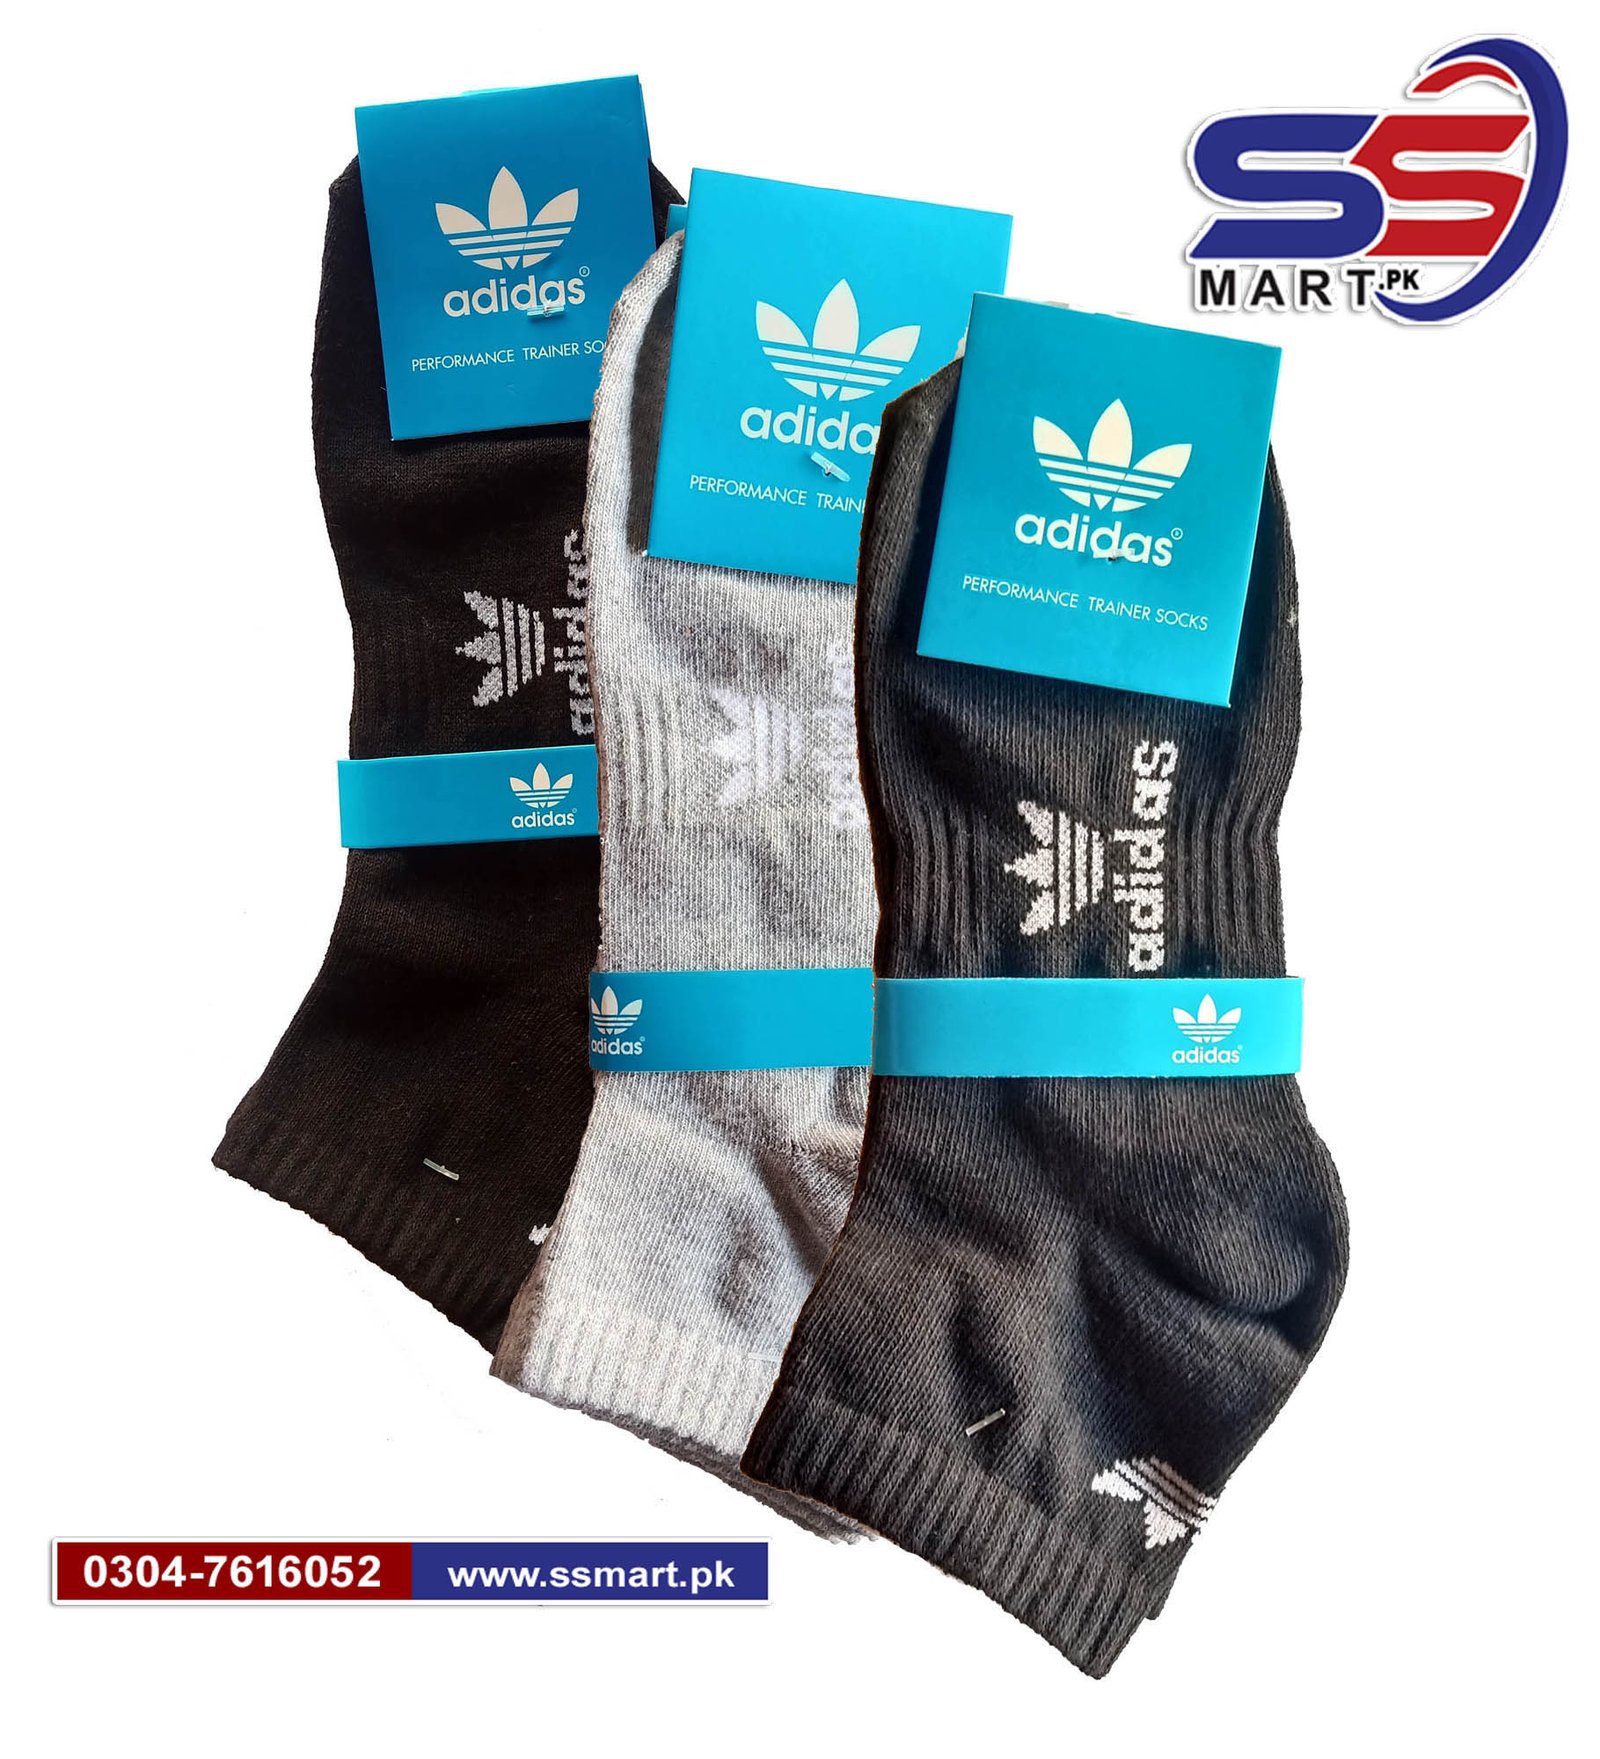 ADIDAS Performance Trainer Socks Low Rise Lowcut (2 Pairs Set)